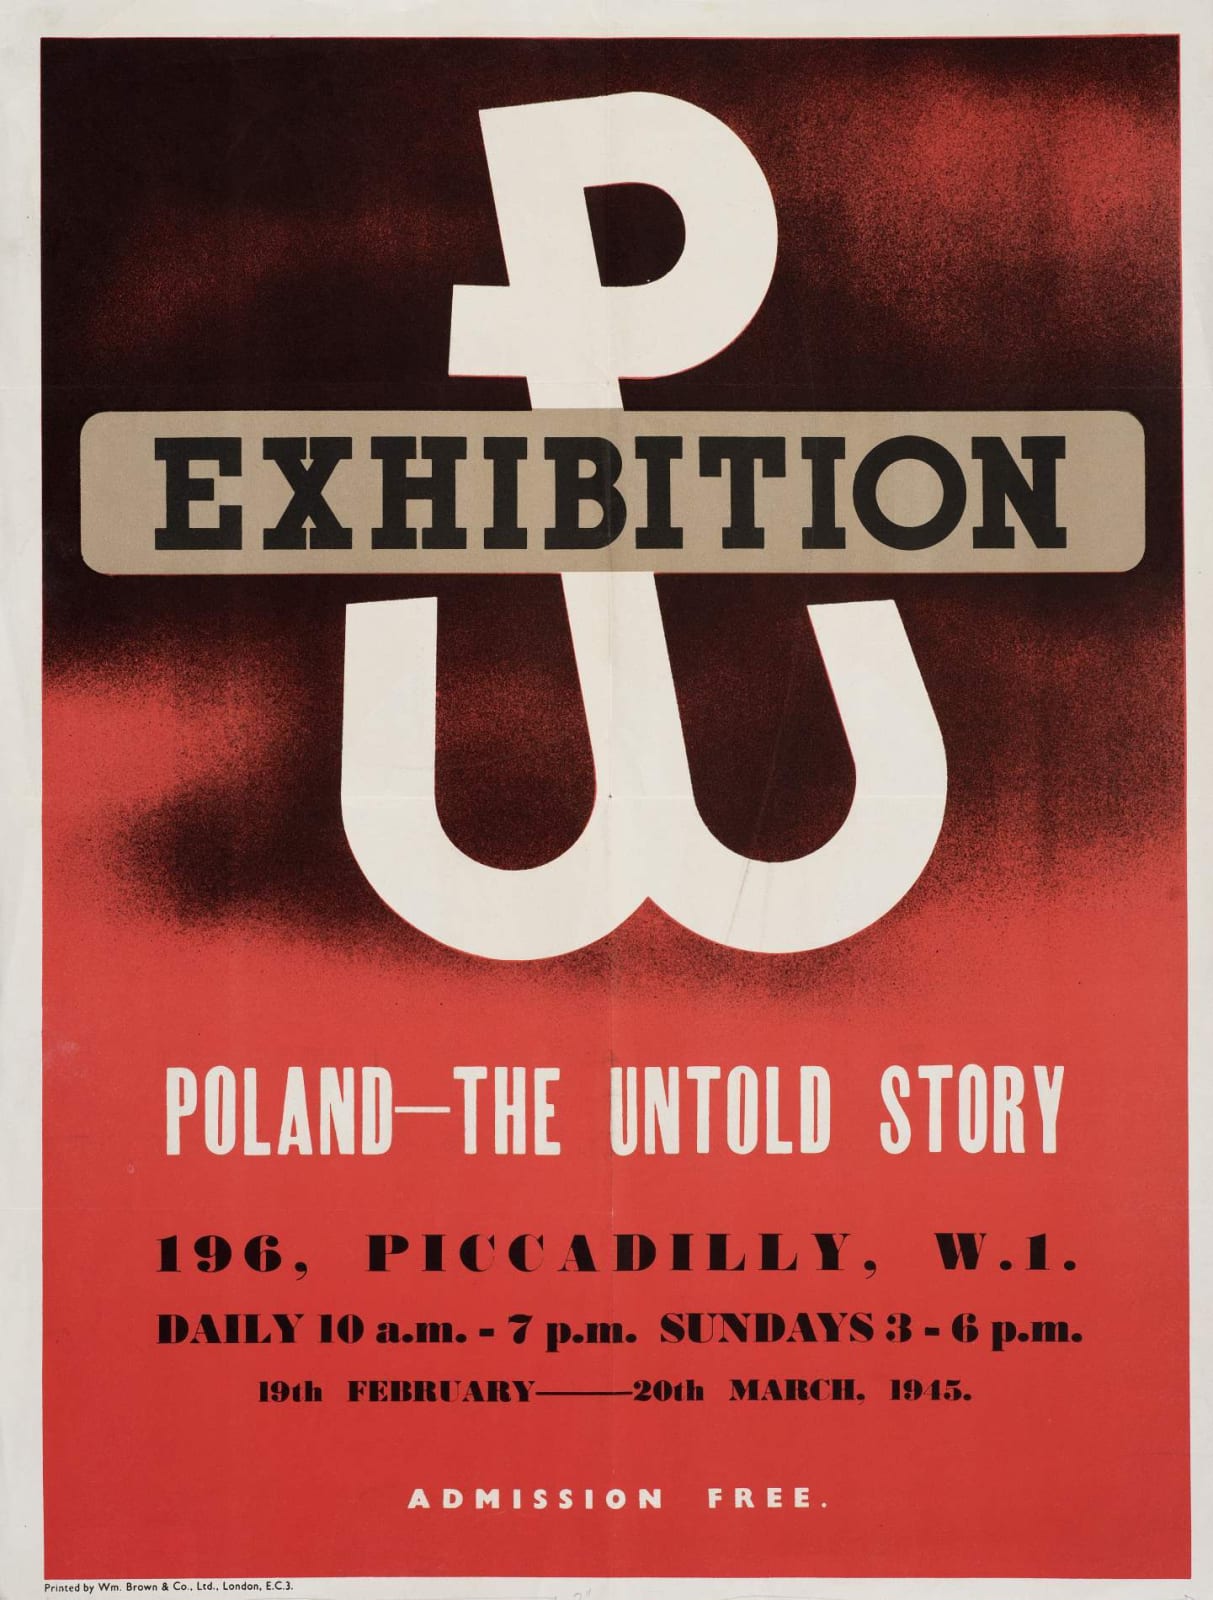 Unknown Poland - The Untold Story, Exhibition 19th February – 20th March 1945 Poster 56 x 42 cm Polish Library, POSK